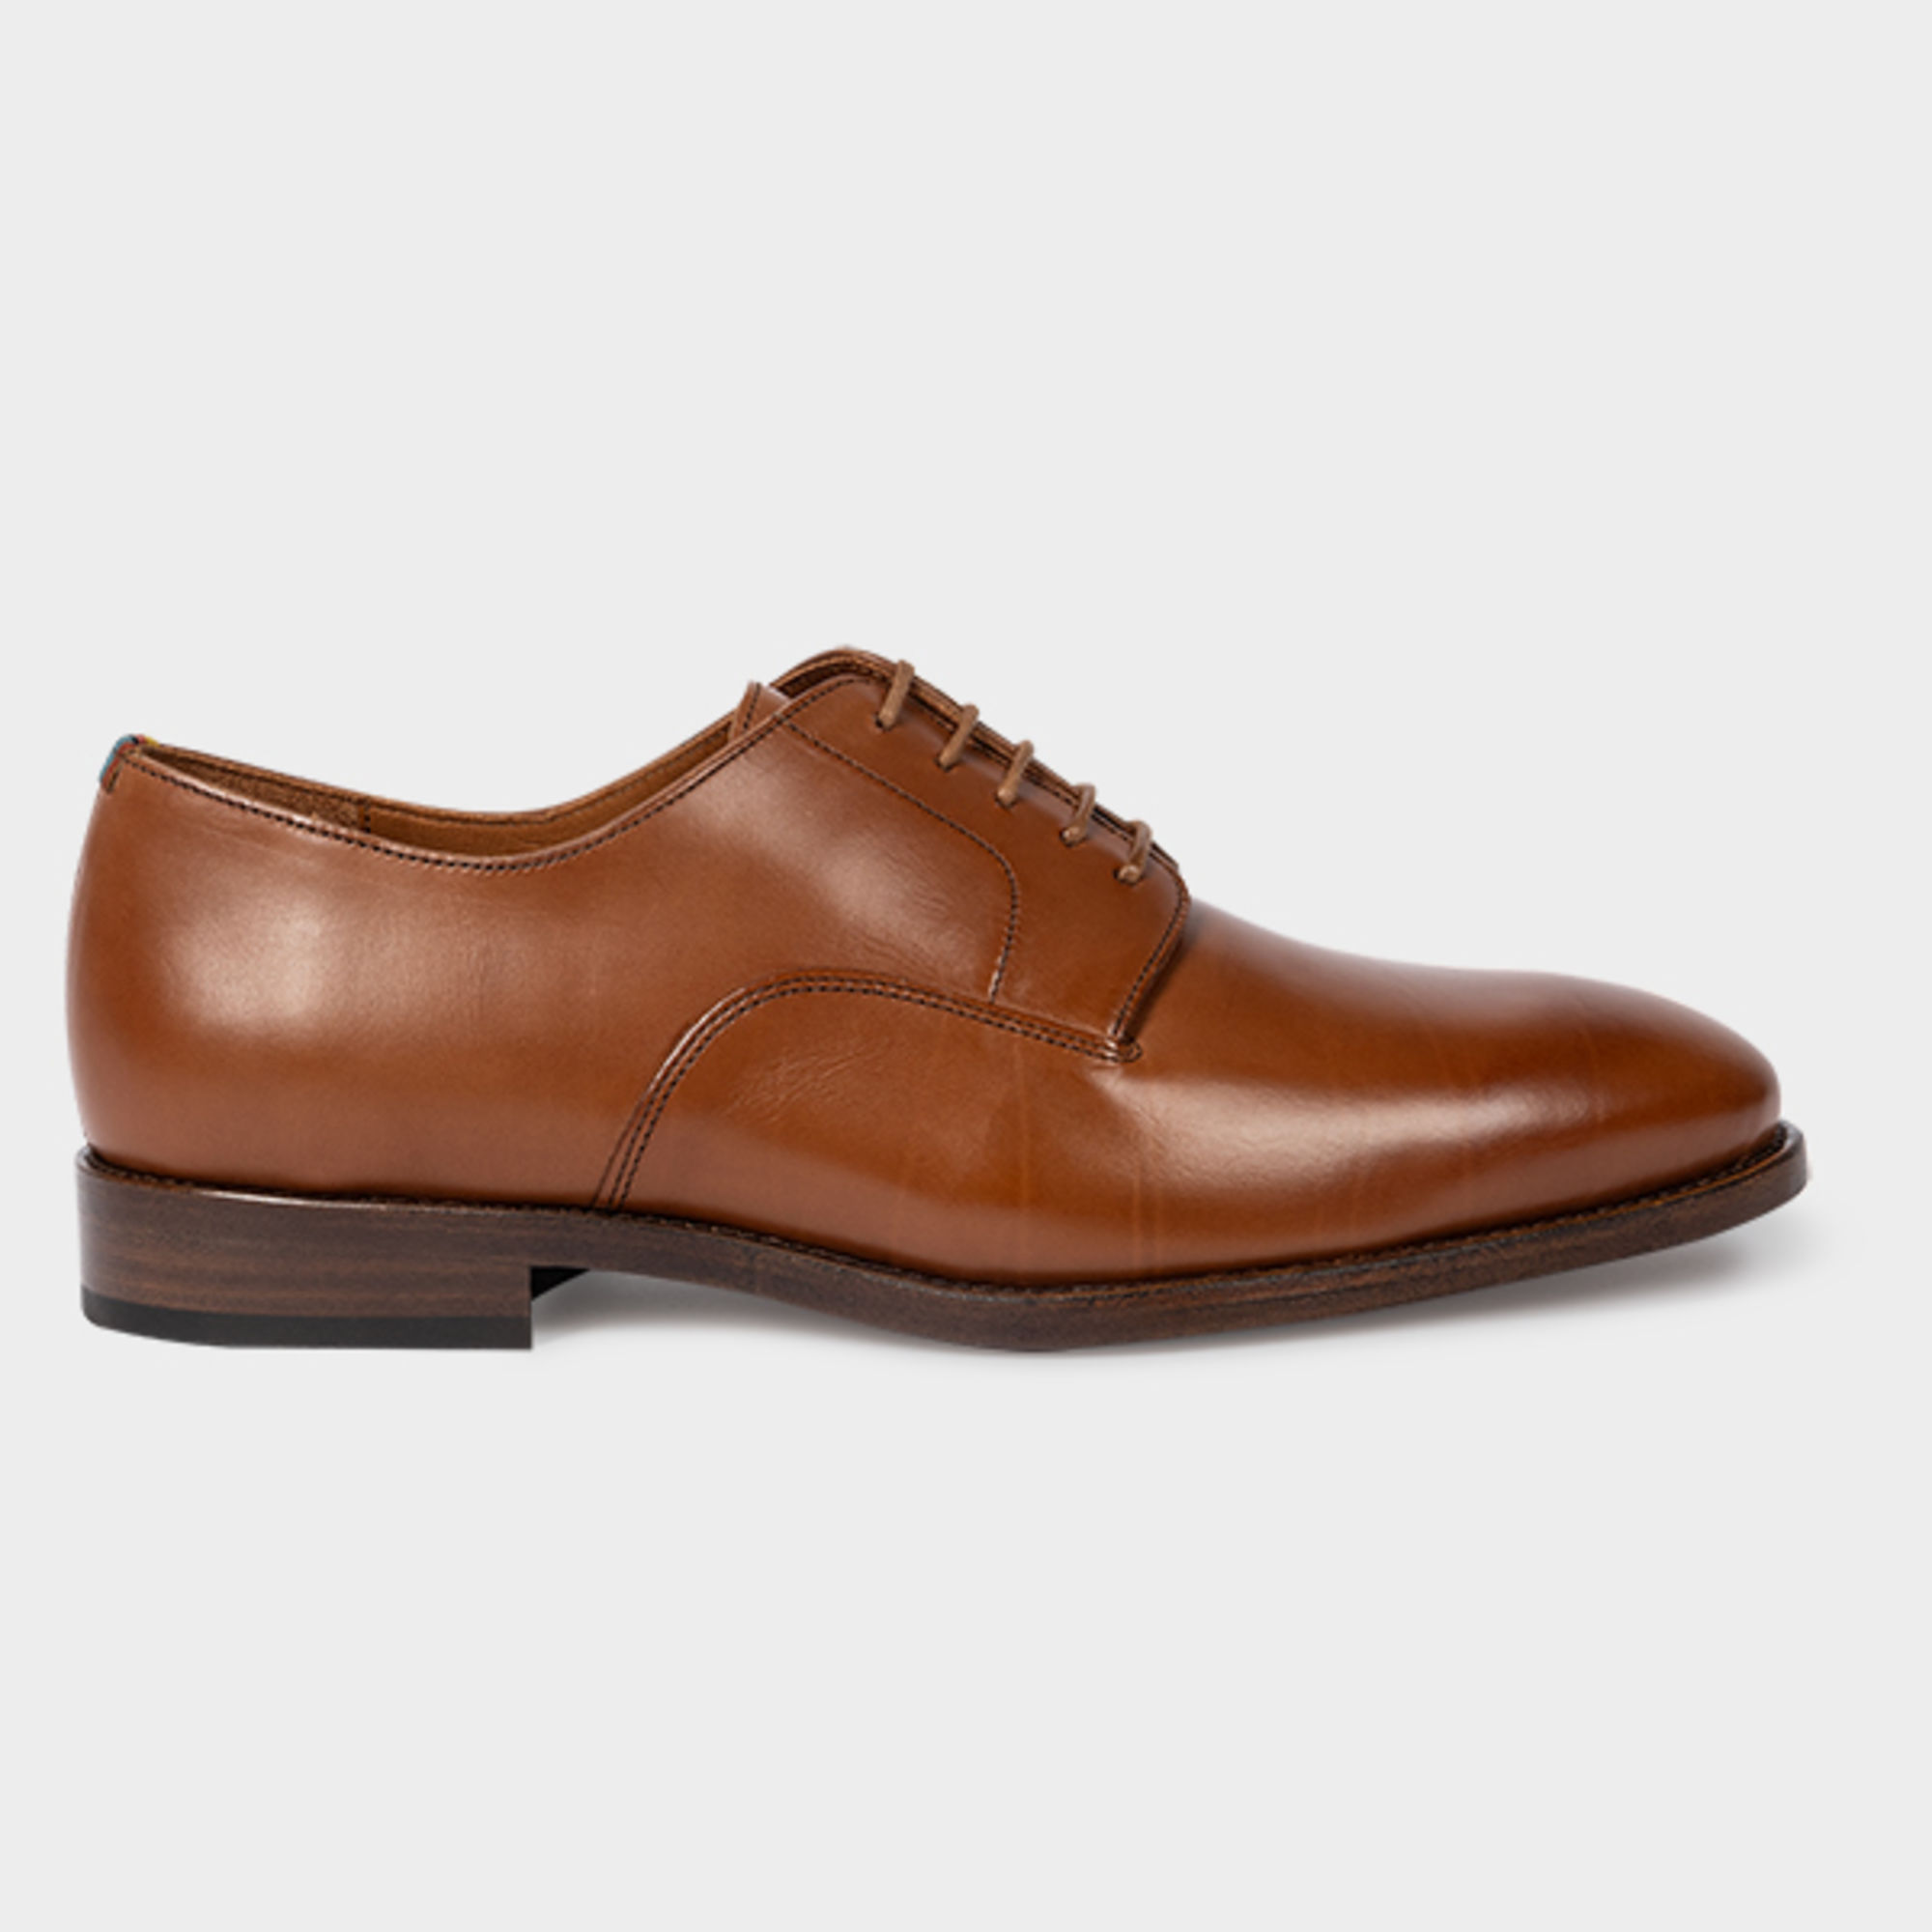 Paul Smith Mens Shoe Fes Tan In Browns